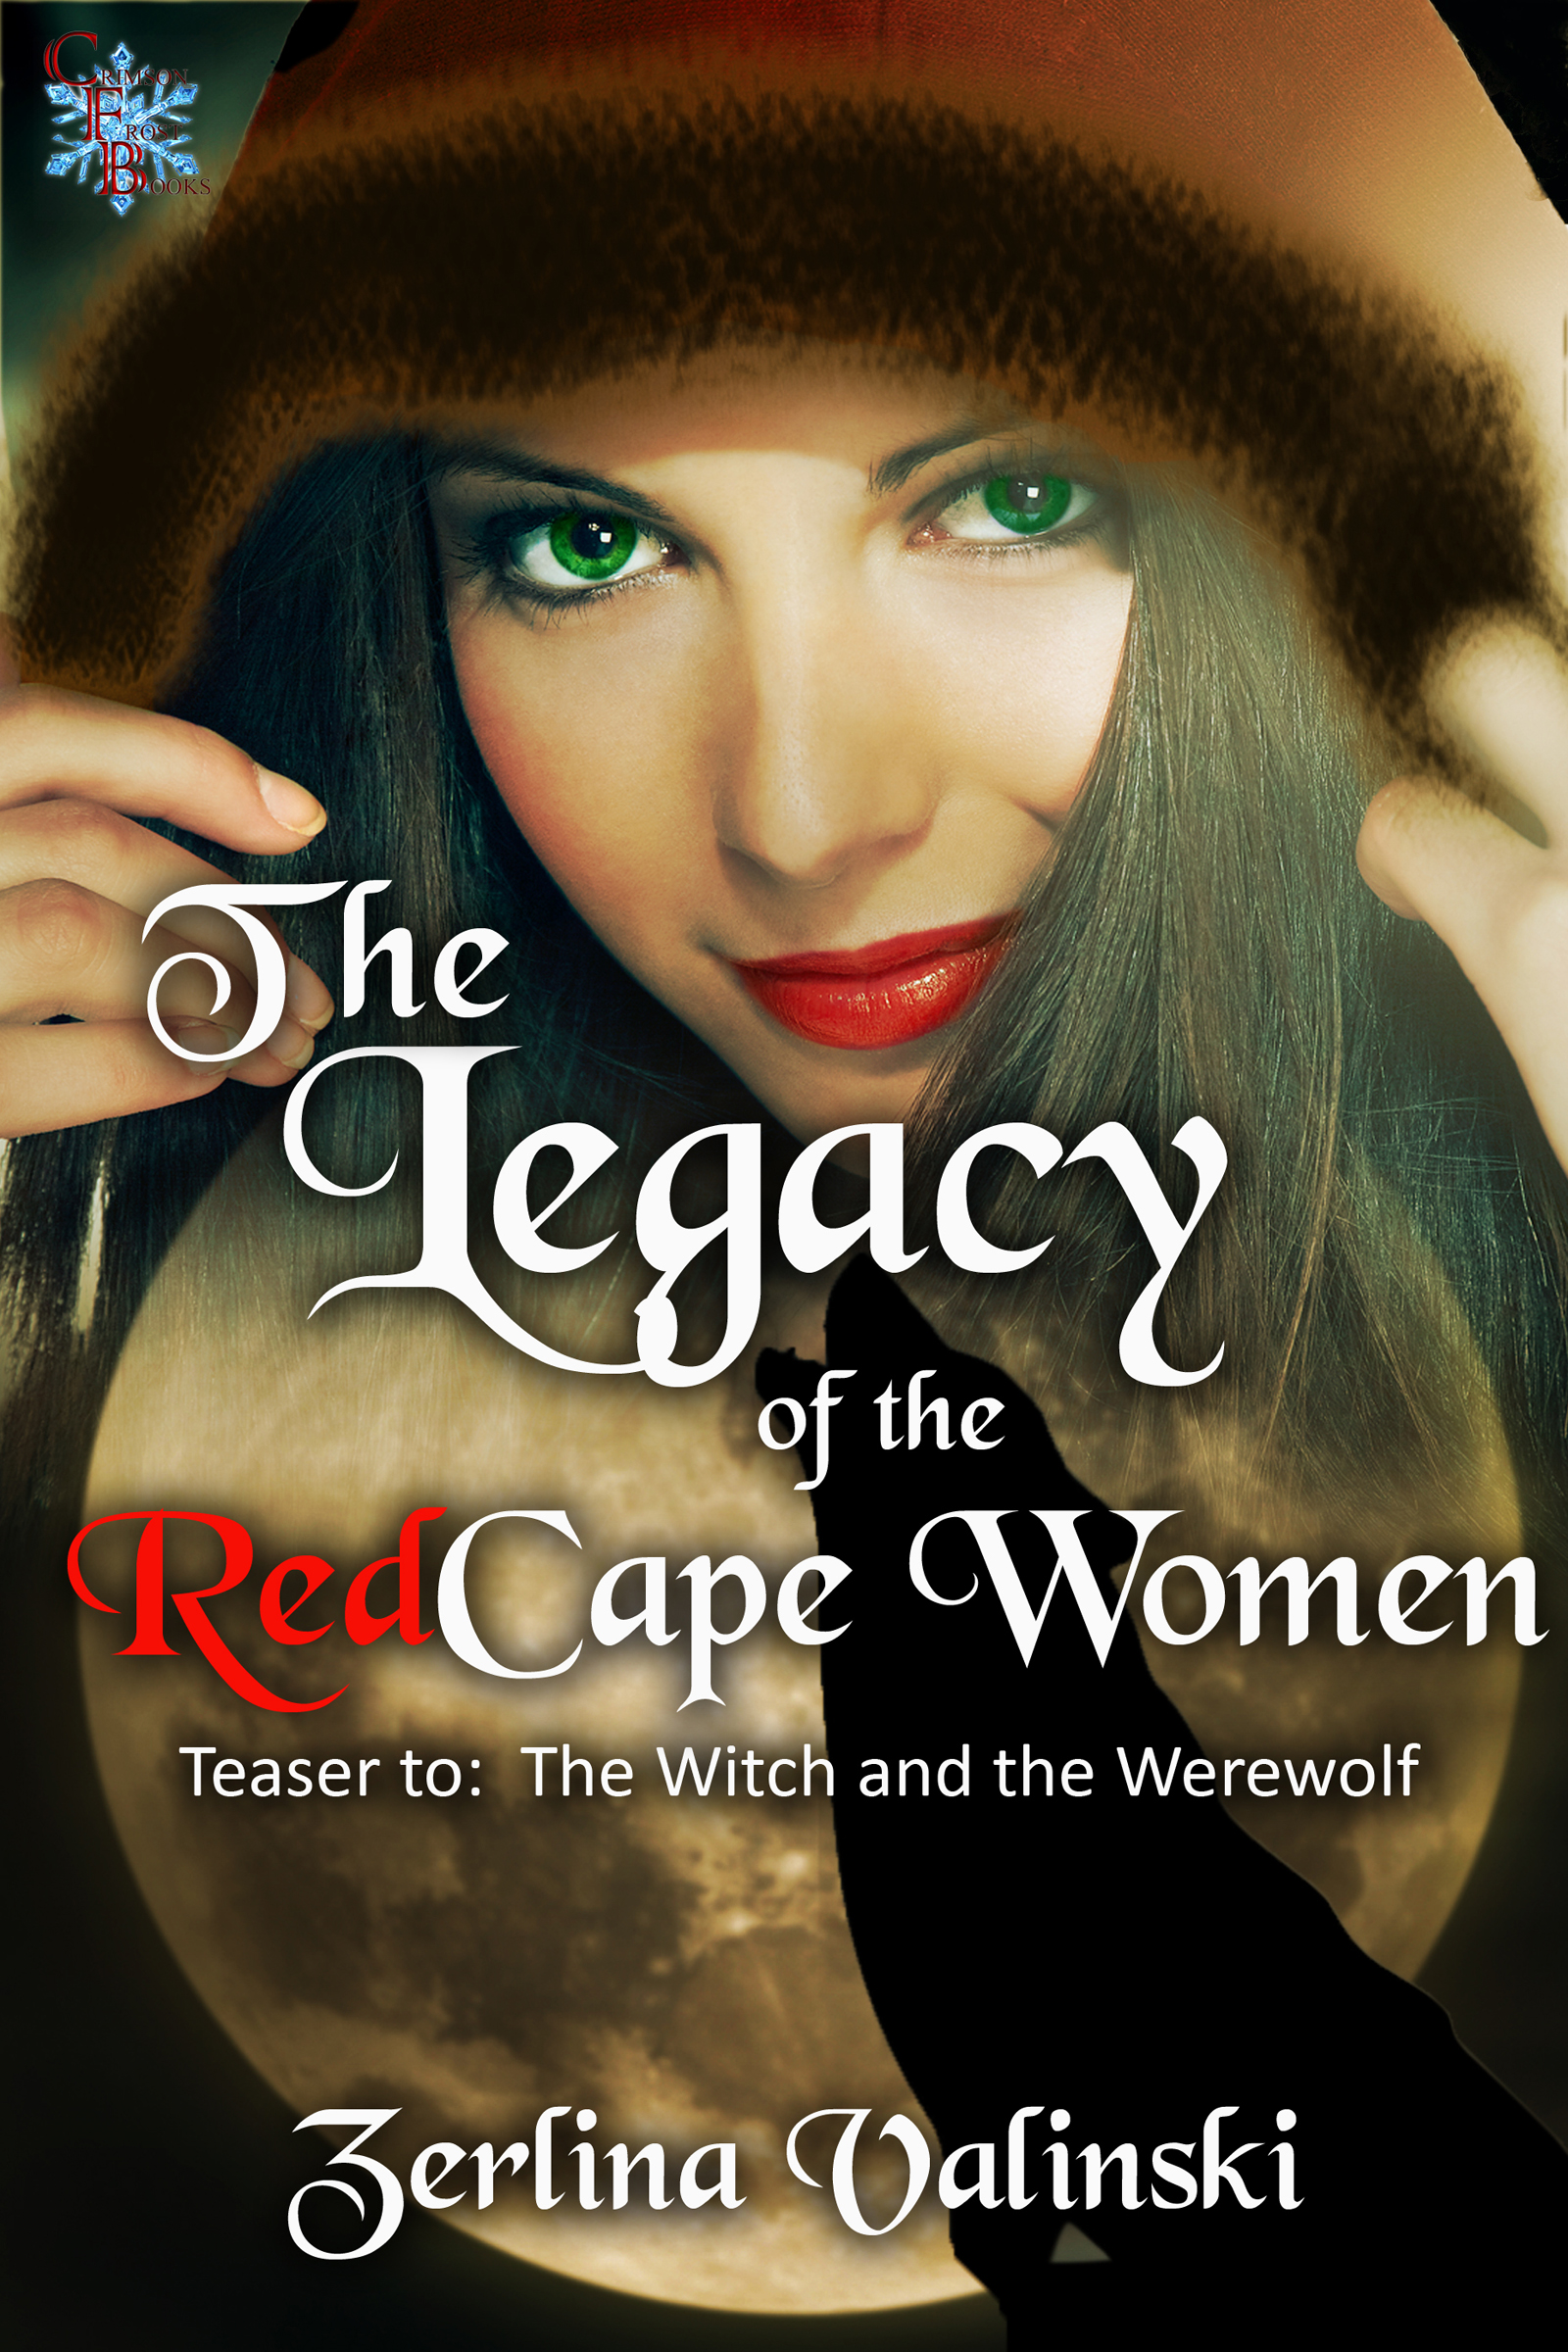 Legacy_ofthe_RedCap_Women cover